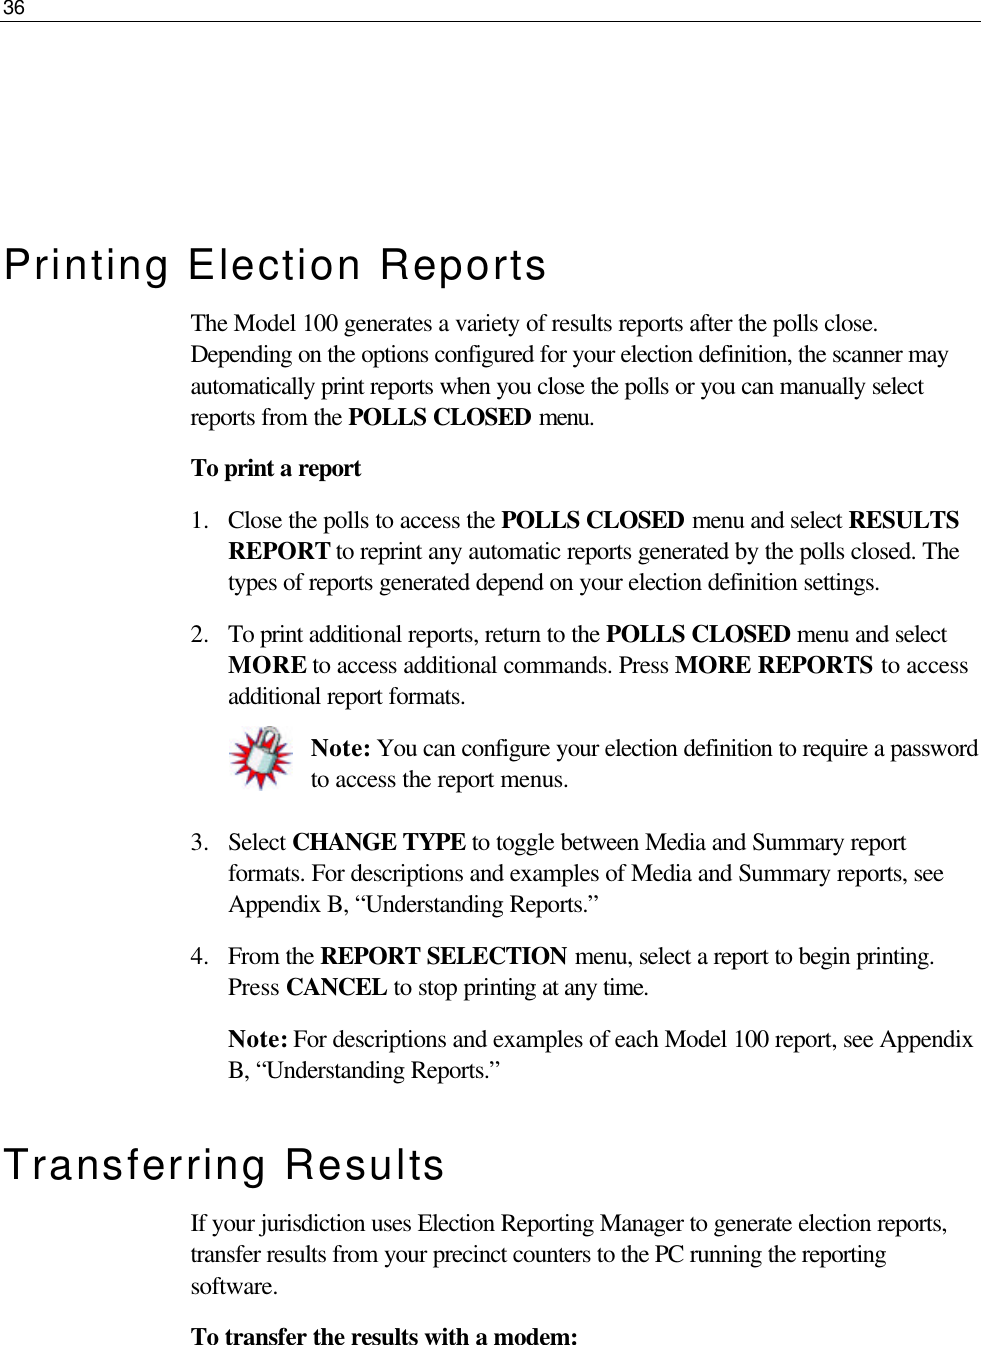 36     Printing Election Reports The Model 100 generates a variety of results reports after the polls close. Depending on the options configured for your election definition, the scanner may automatically print reports when you close the polls or you can manually select reports from the POLLS CLOSED menu. To print a report 1.  Close the polls to access the POLLS CLOSED menu and select RESULTS REPORT to reprint any automatic reports generated by the polls closed. The types of reports generated depend on your election definition settings. 2.  To print additional reports, return to the POLLS CLOSED menu and select MORE to access additional commands. Press MORE REPORTS to access additional report formats. Note: You can configure your election definition to require a password to access the report menus.  3.  Select CHANGE TYPE to toggle between Media and Summary report formats. For descriptions and examples of Media and Summary reports, see Appendix B, “Understanding Reports.” 4.  From the REPORT SELECTION menu, select a report to begin printing. Press CANCEL to stop printing at any time.  Note: For descriptions and examples of each Model 100 report, see Appendix B, “Understanding Reports.” Transferring Results If your jurisdiction uses Election Reporting Manager to generate election reports, transfer results from your precinct counters to the PC running the reporting software.  To transfer the results with a modem: 